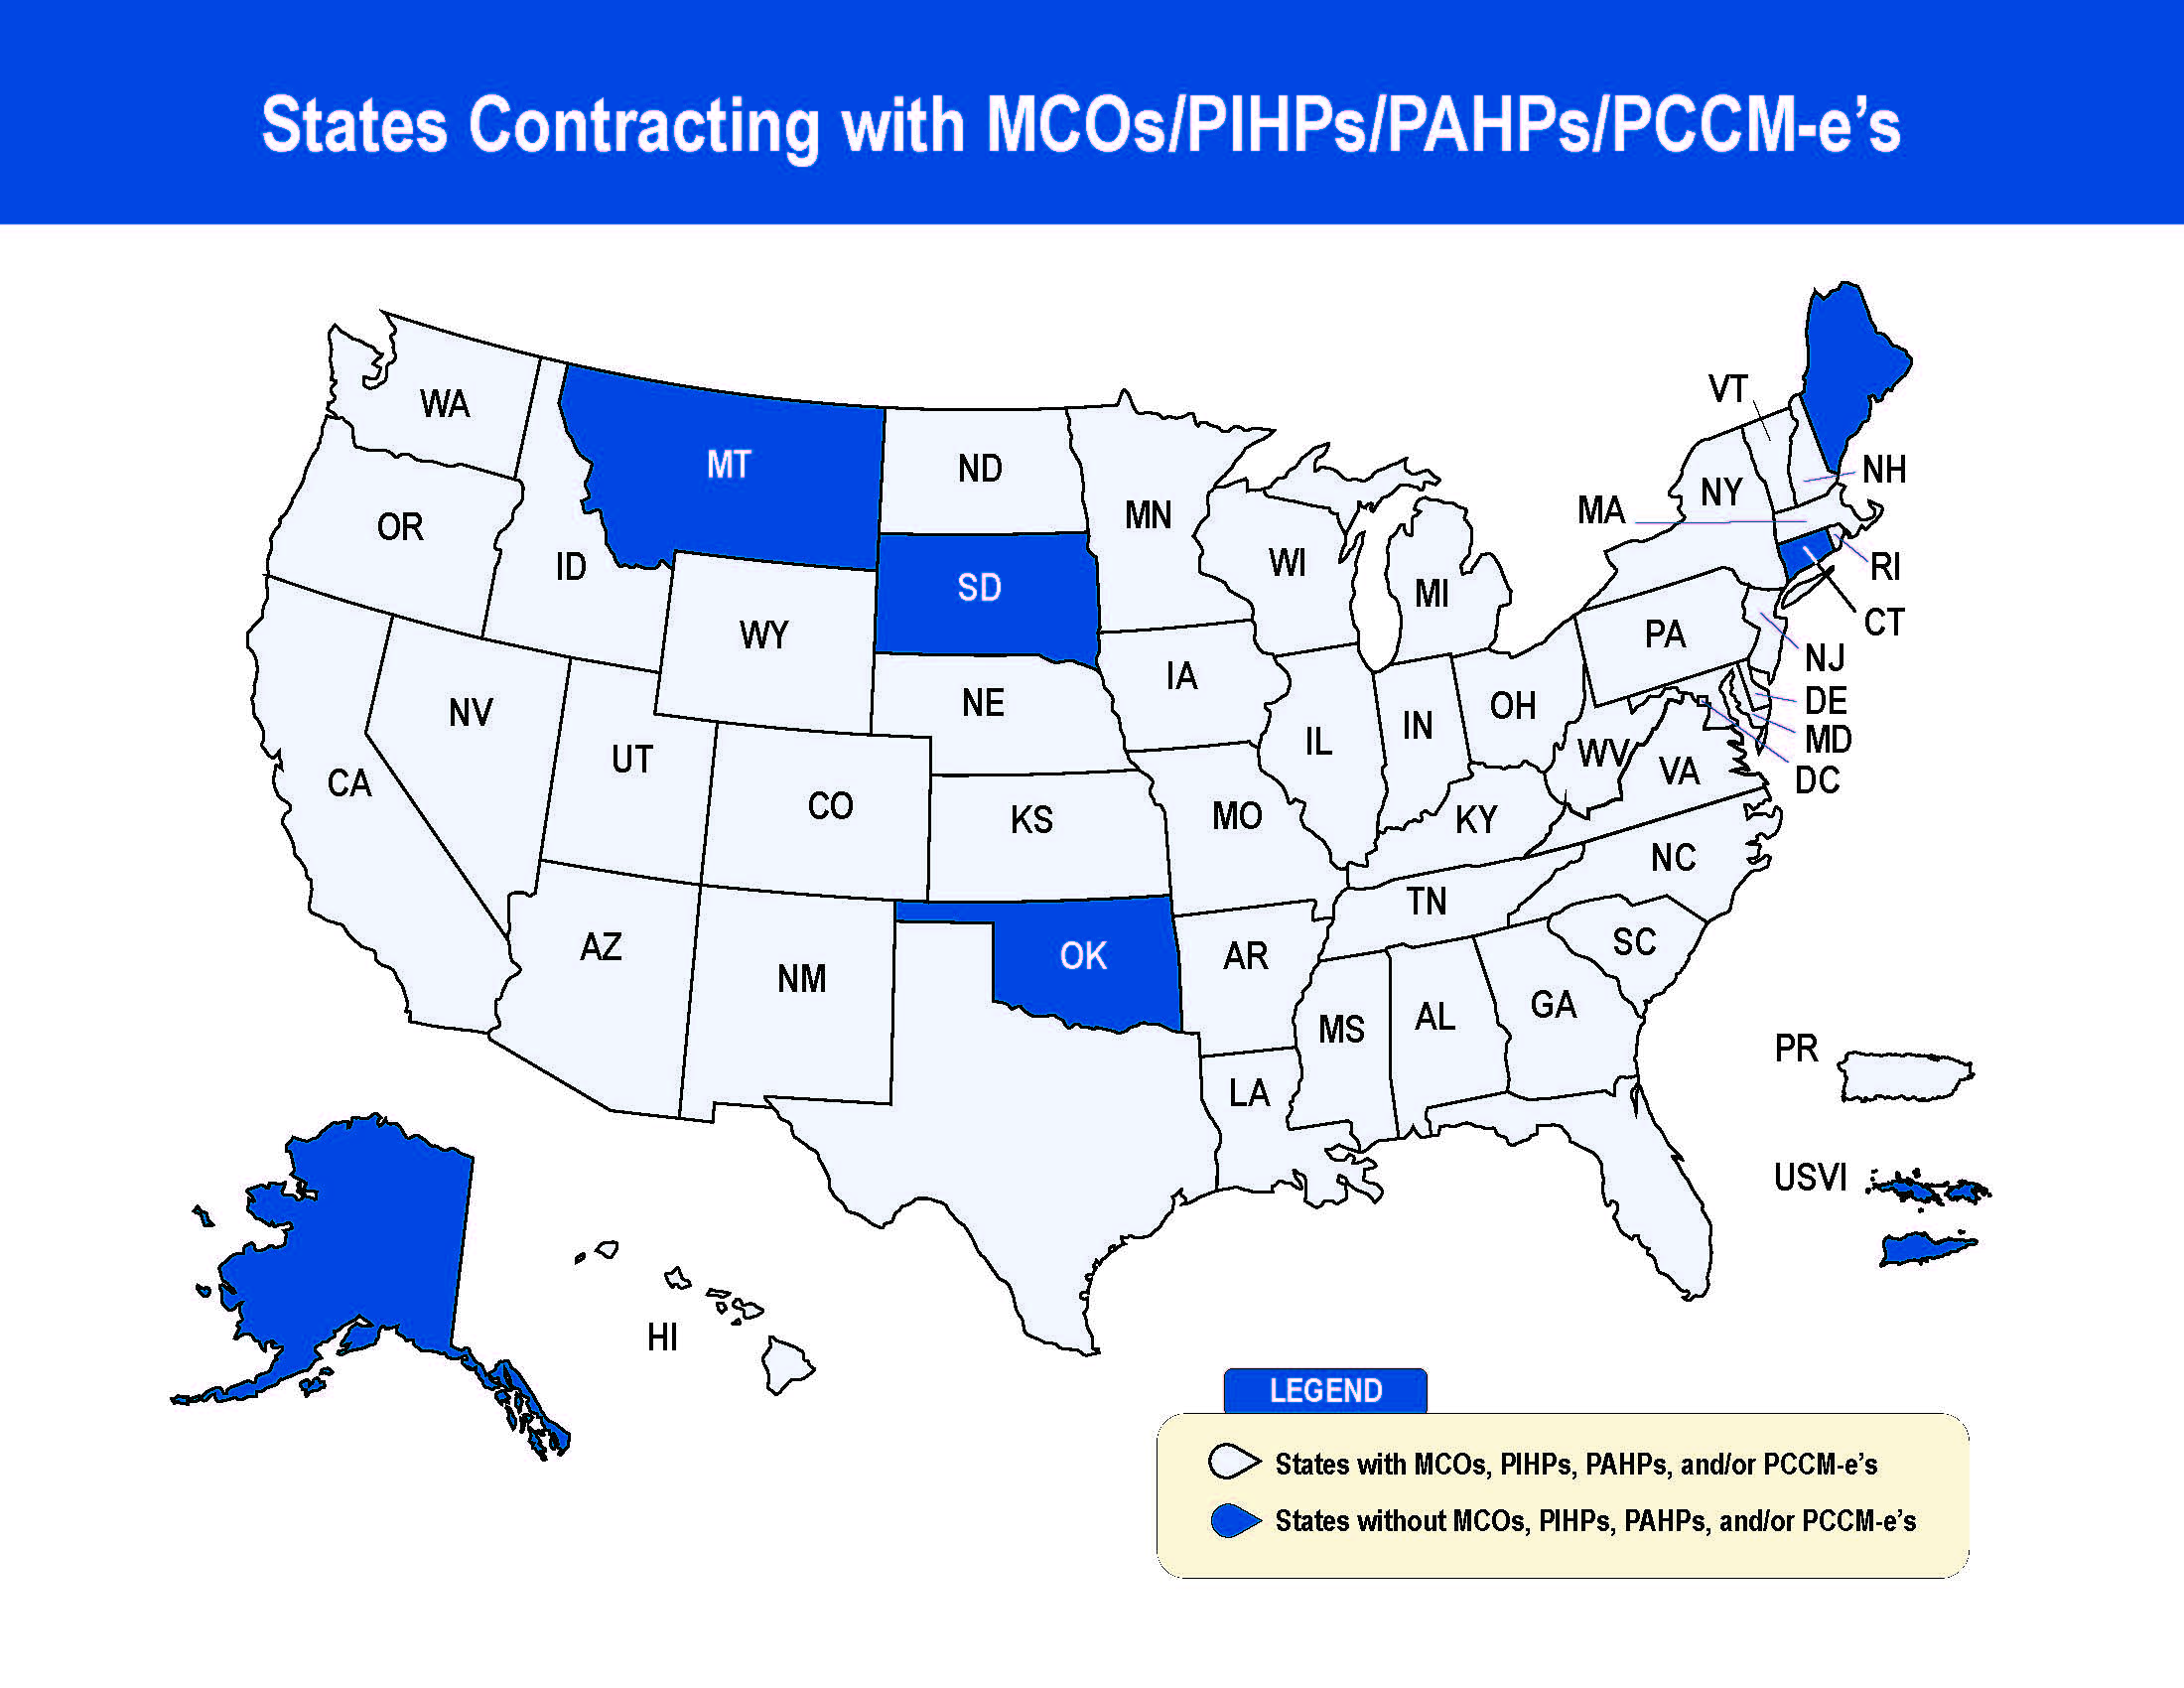 States Contracting with MCOs/PIHPs/PAHPs/PCCM-e’s.